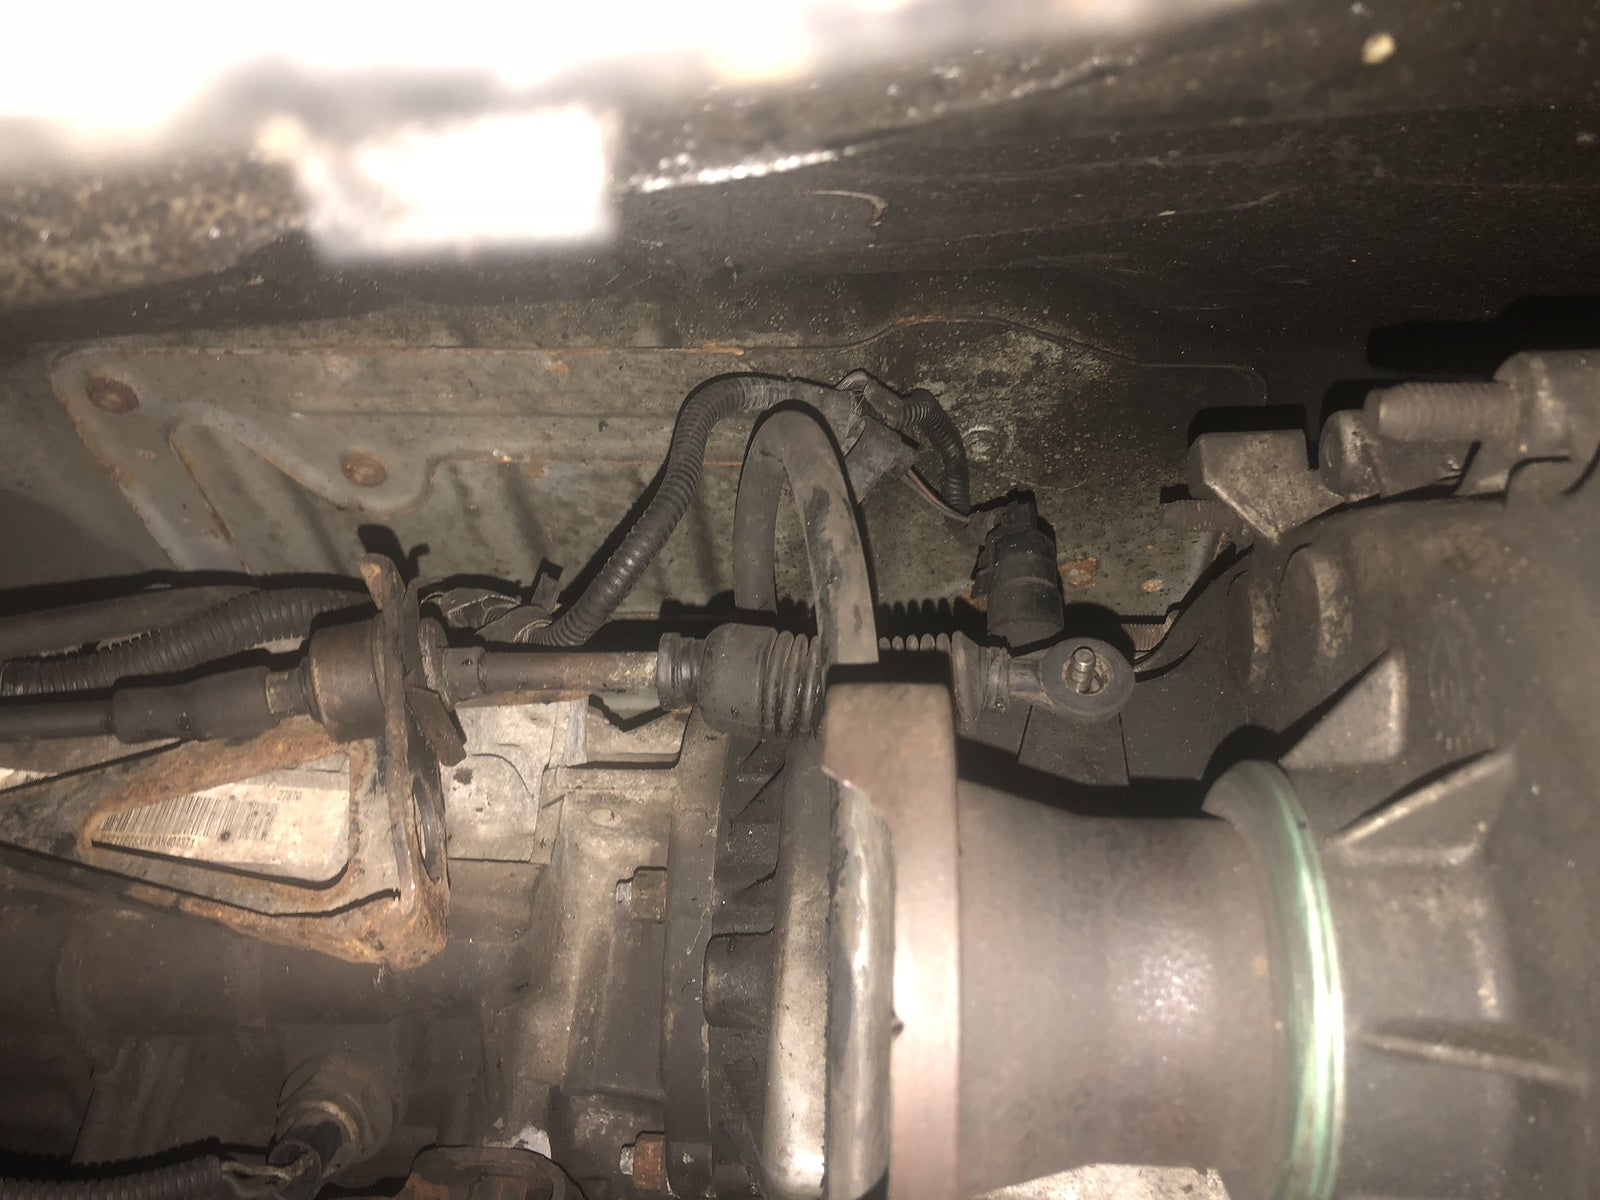 Jeep Grand Cherokee Questions - Jeep GC 2000 transfer case issues - CarGurus